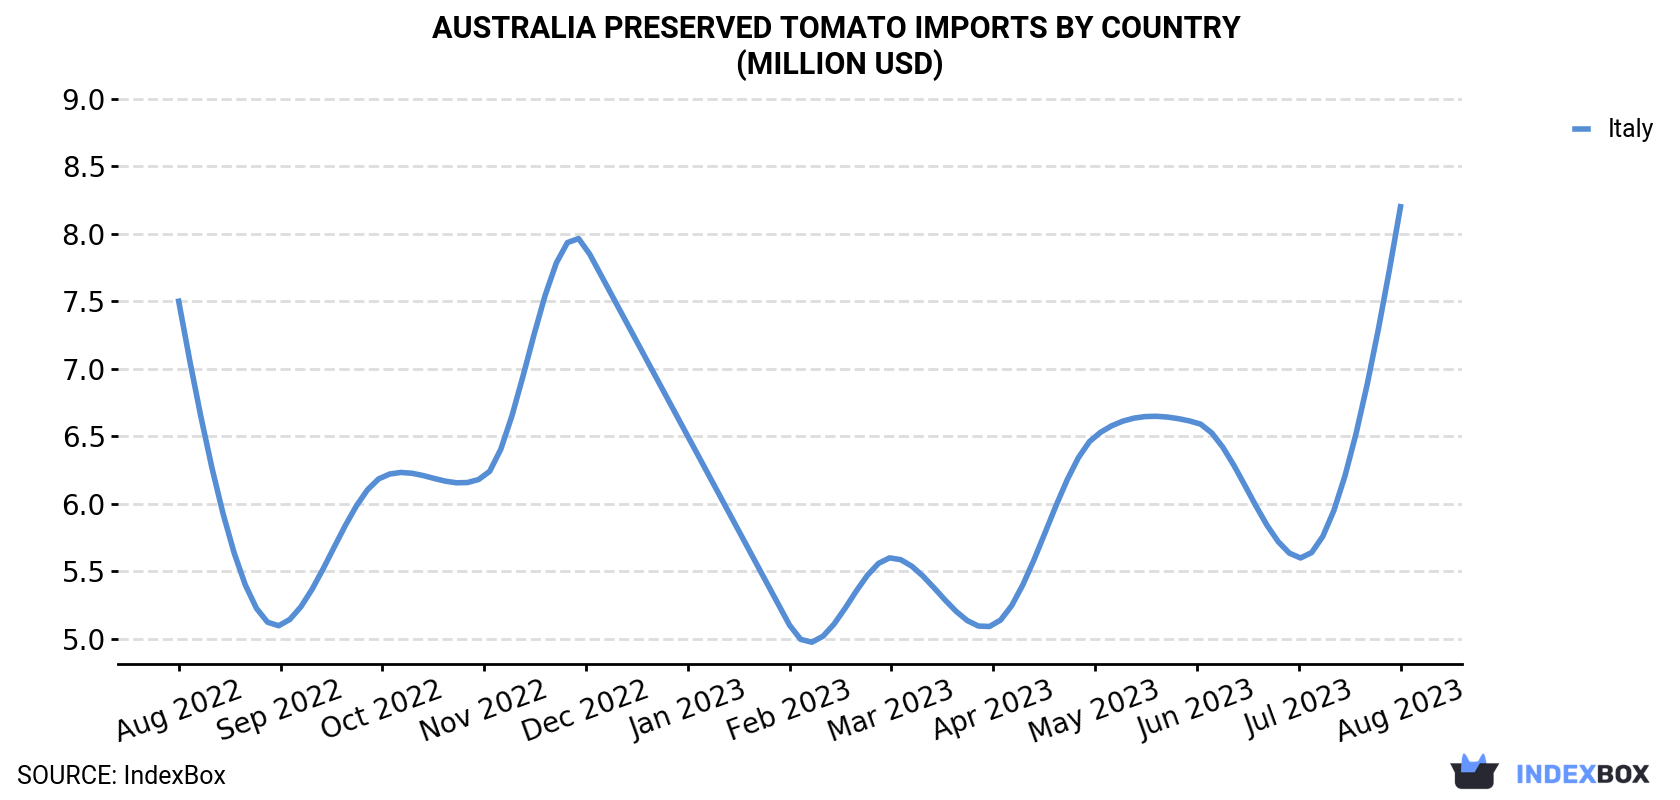 Australia Preserved Tomato Imports By Country (Million USD)